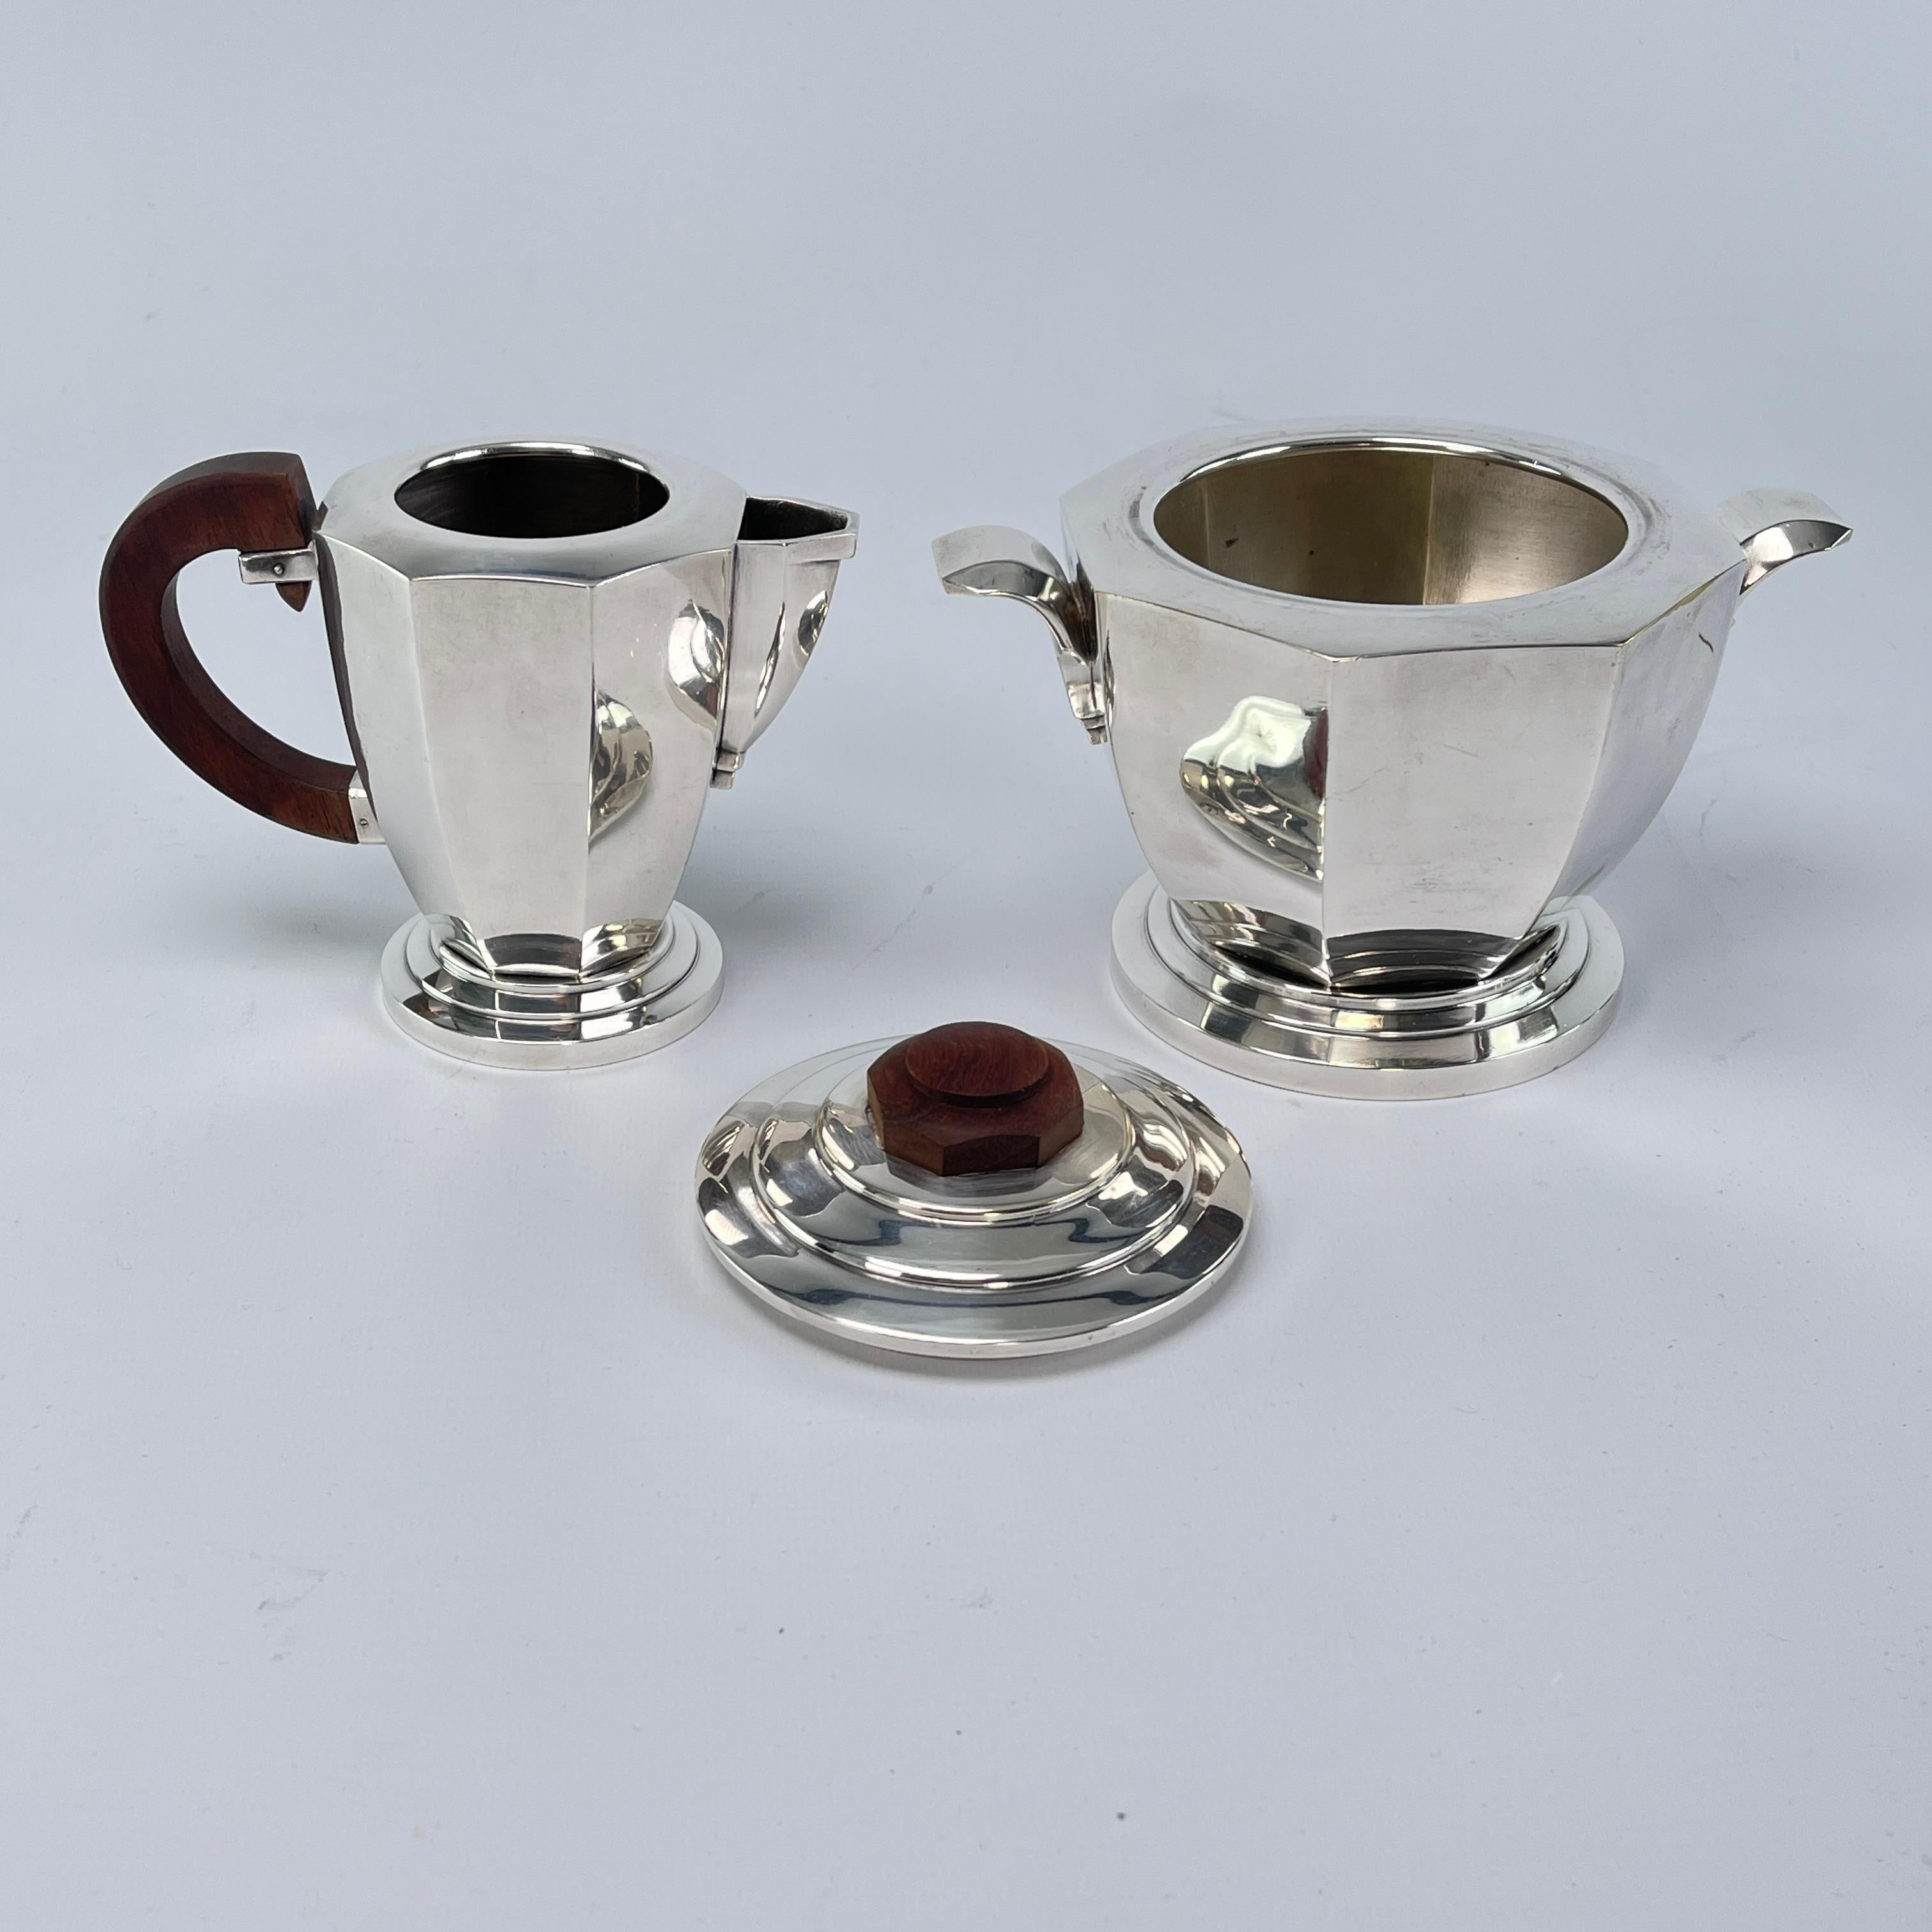 French beautiful four-piece set ART DECO coffee service silver-plated tea service, 1920